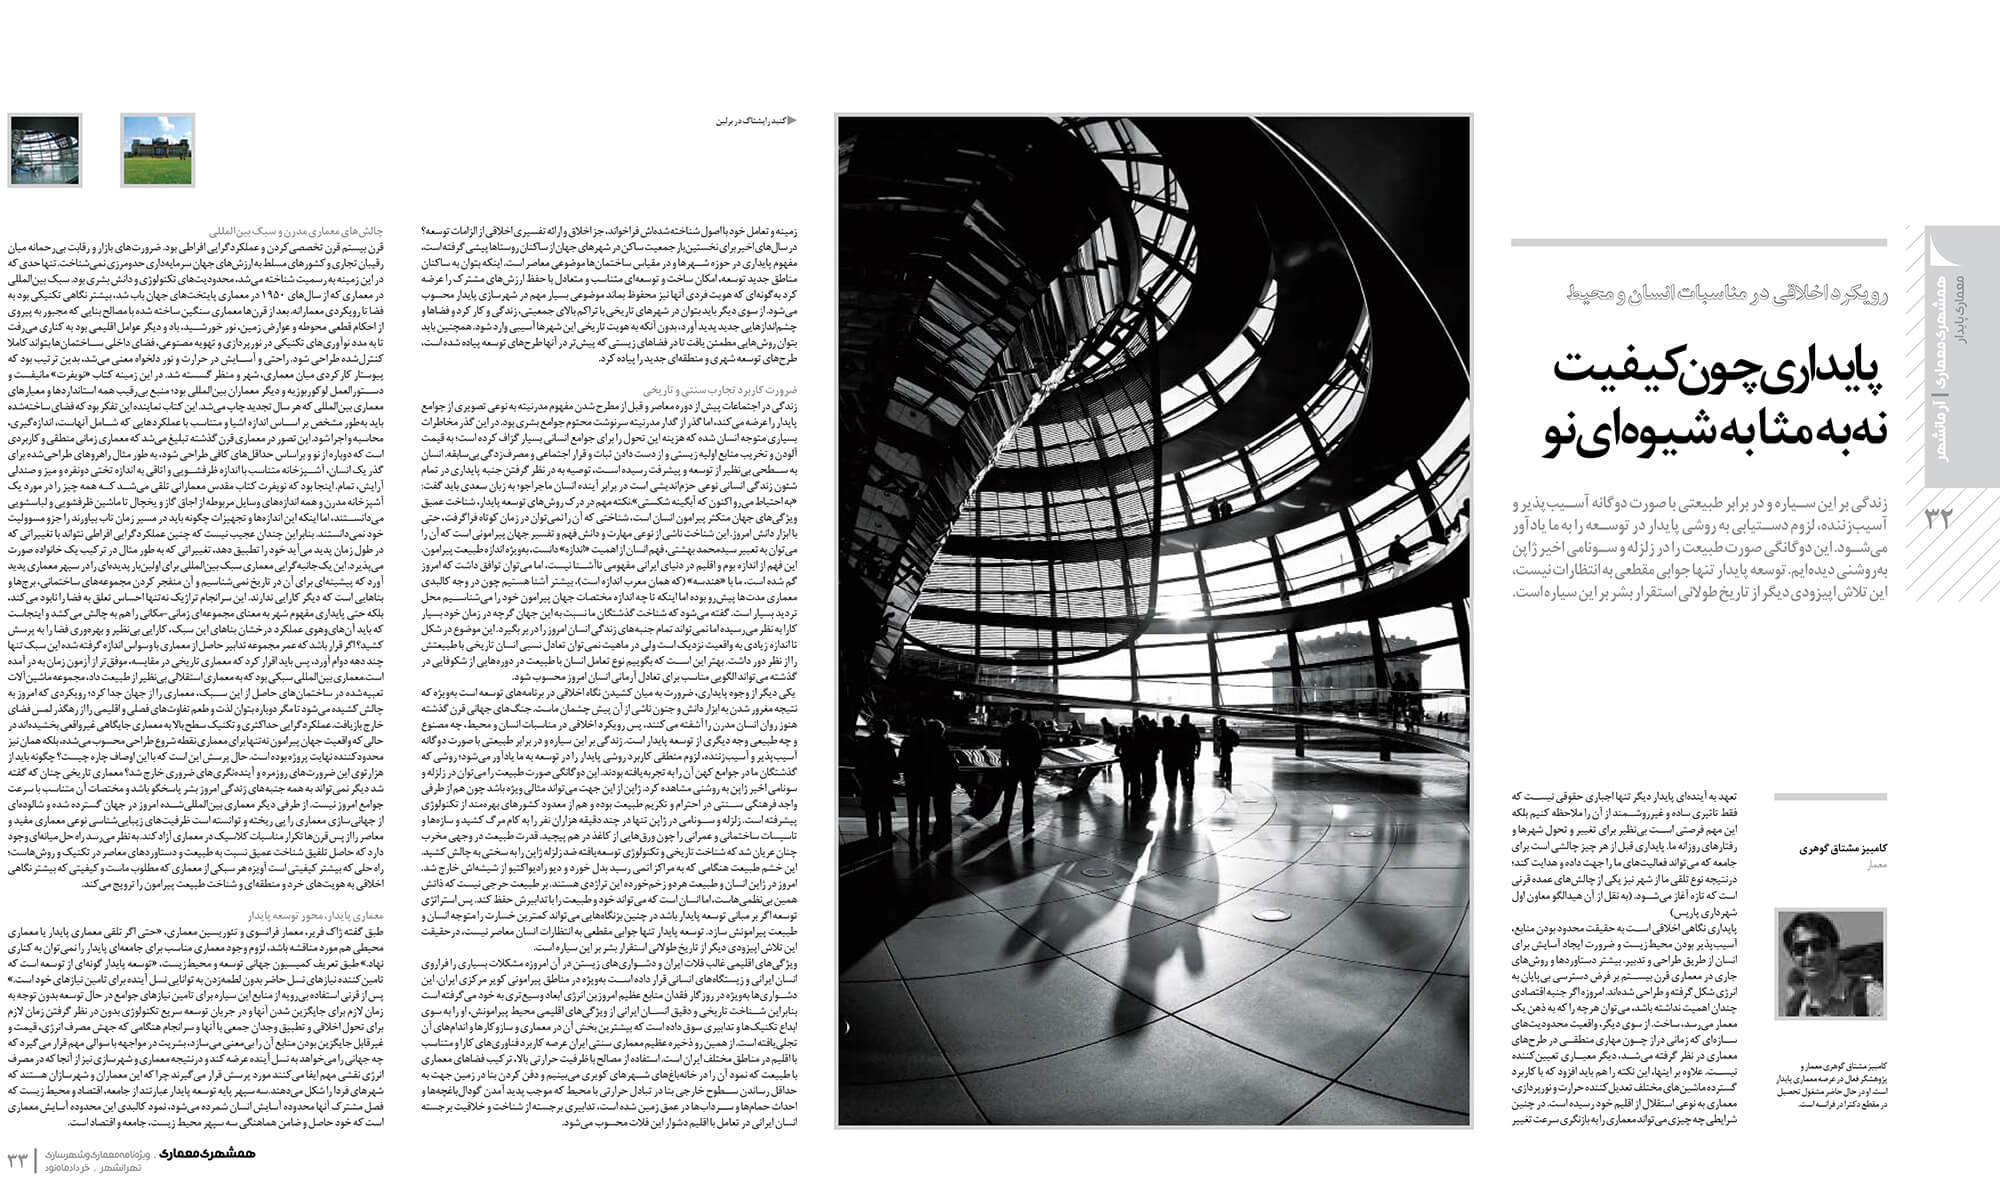 picture no. 2 of publication: Sustainibility As a Quality in Architecture, author: Kambiz Moshtaq